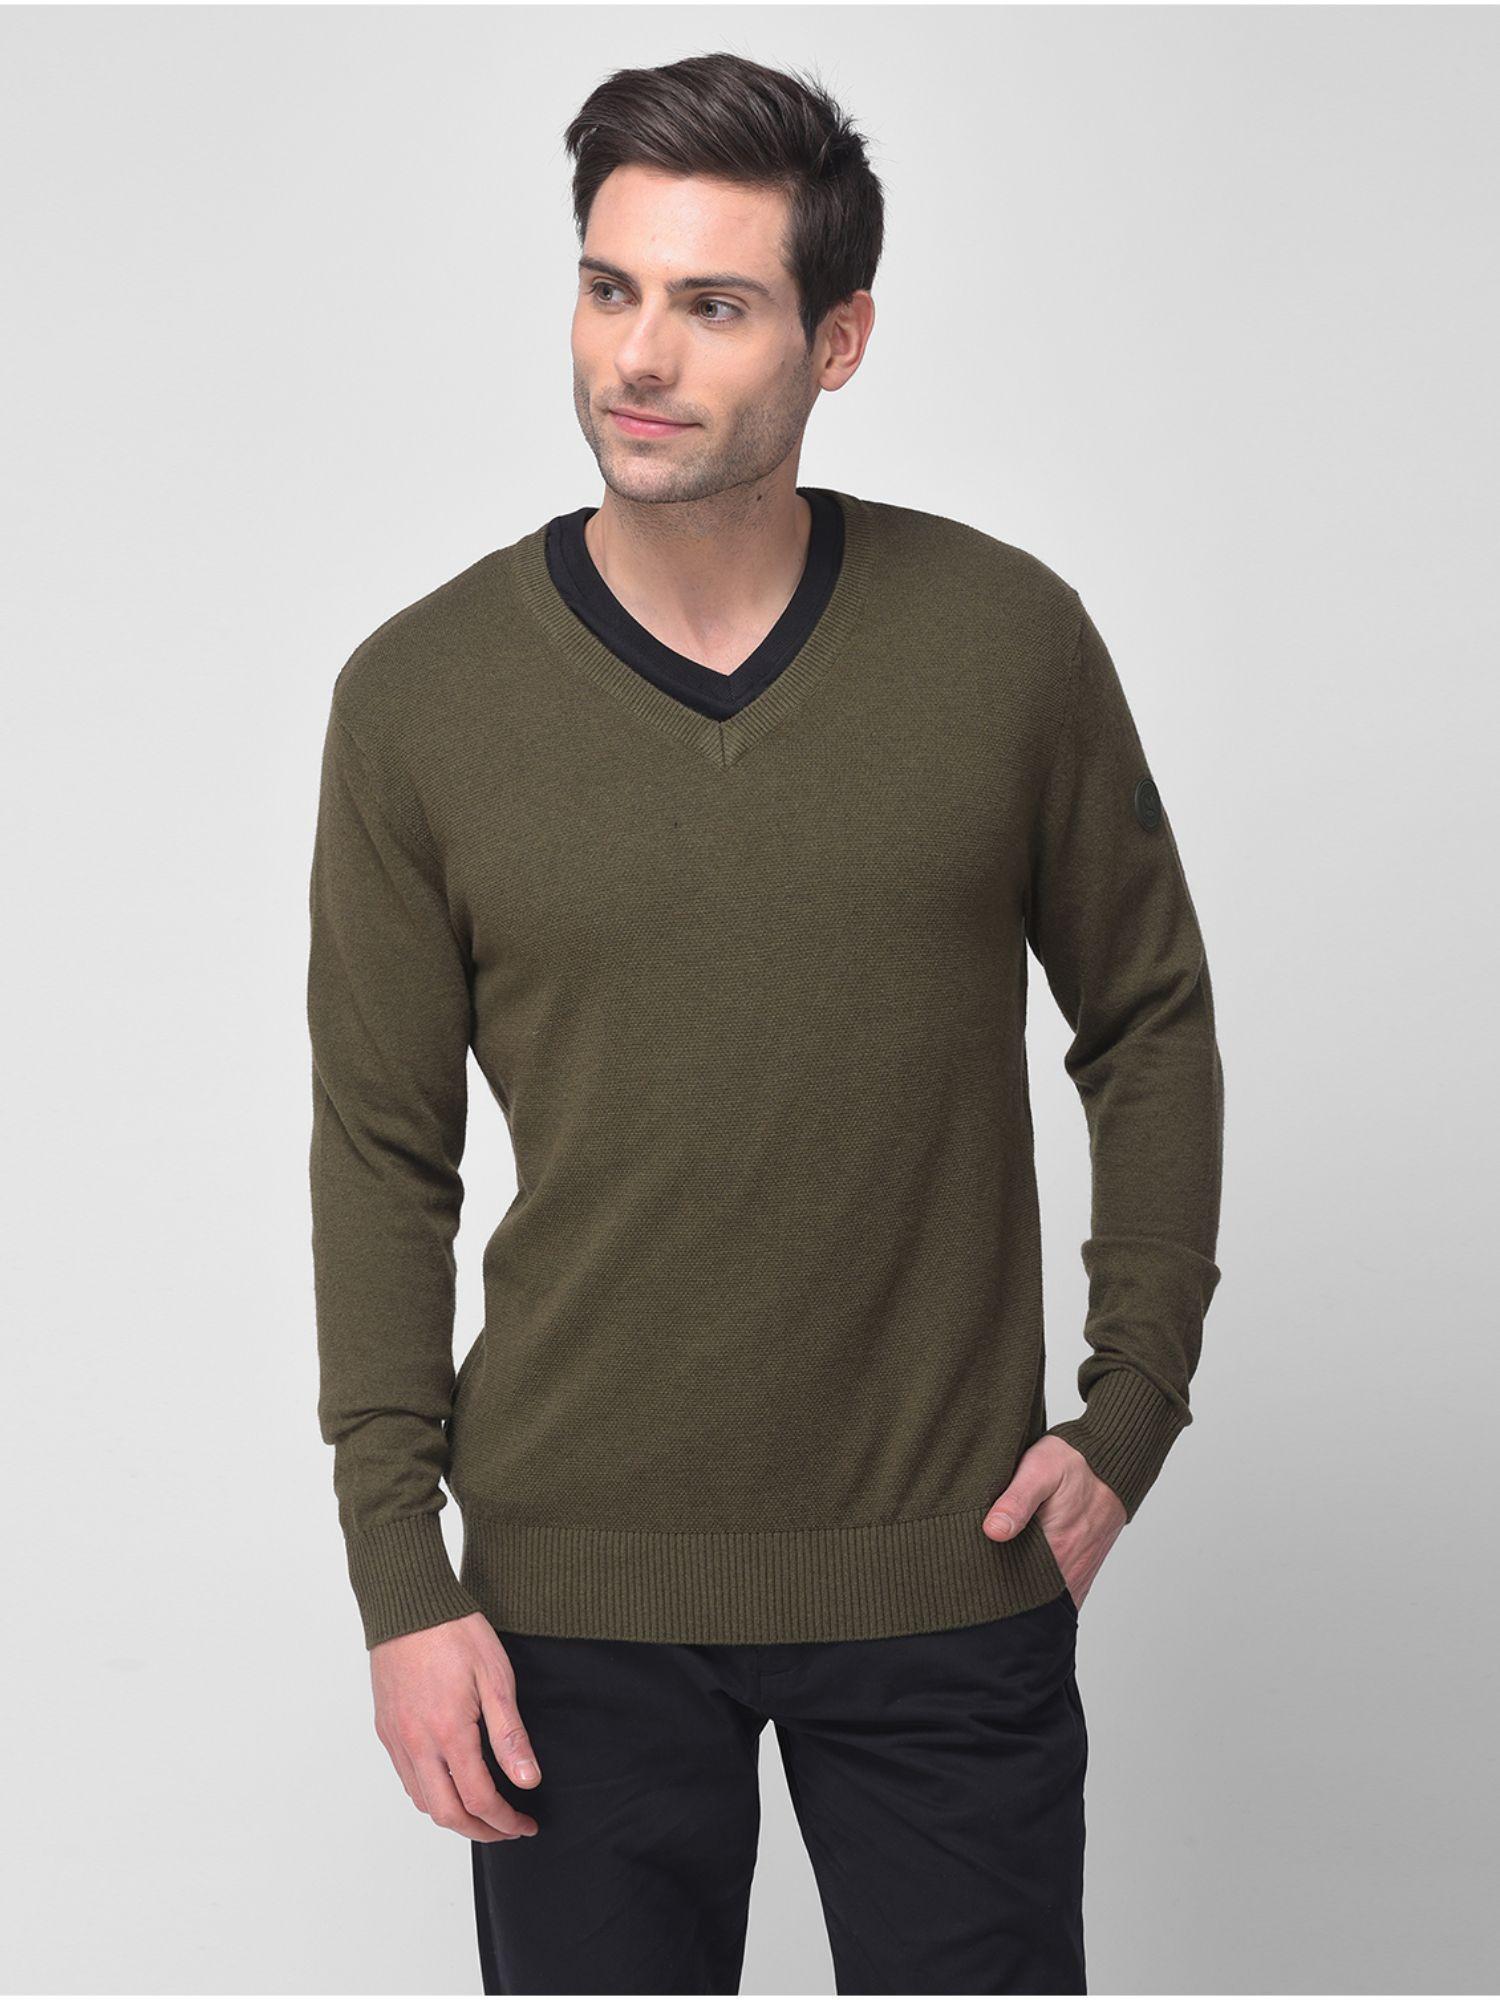 mens solid full sleeves green sweater